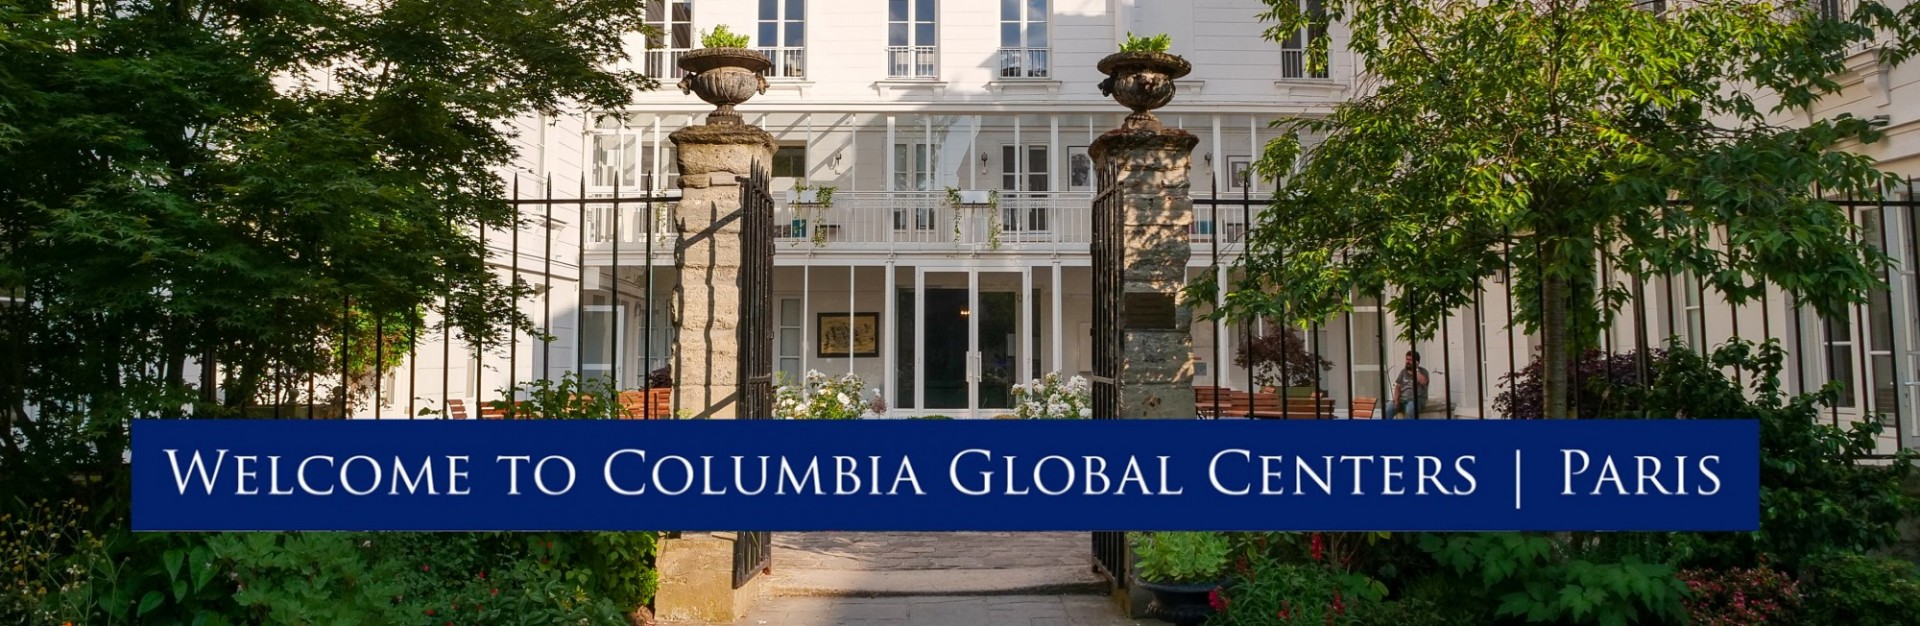 Welcome to Columbia Global Centers | Paris